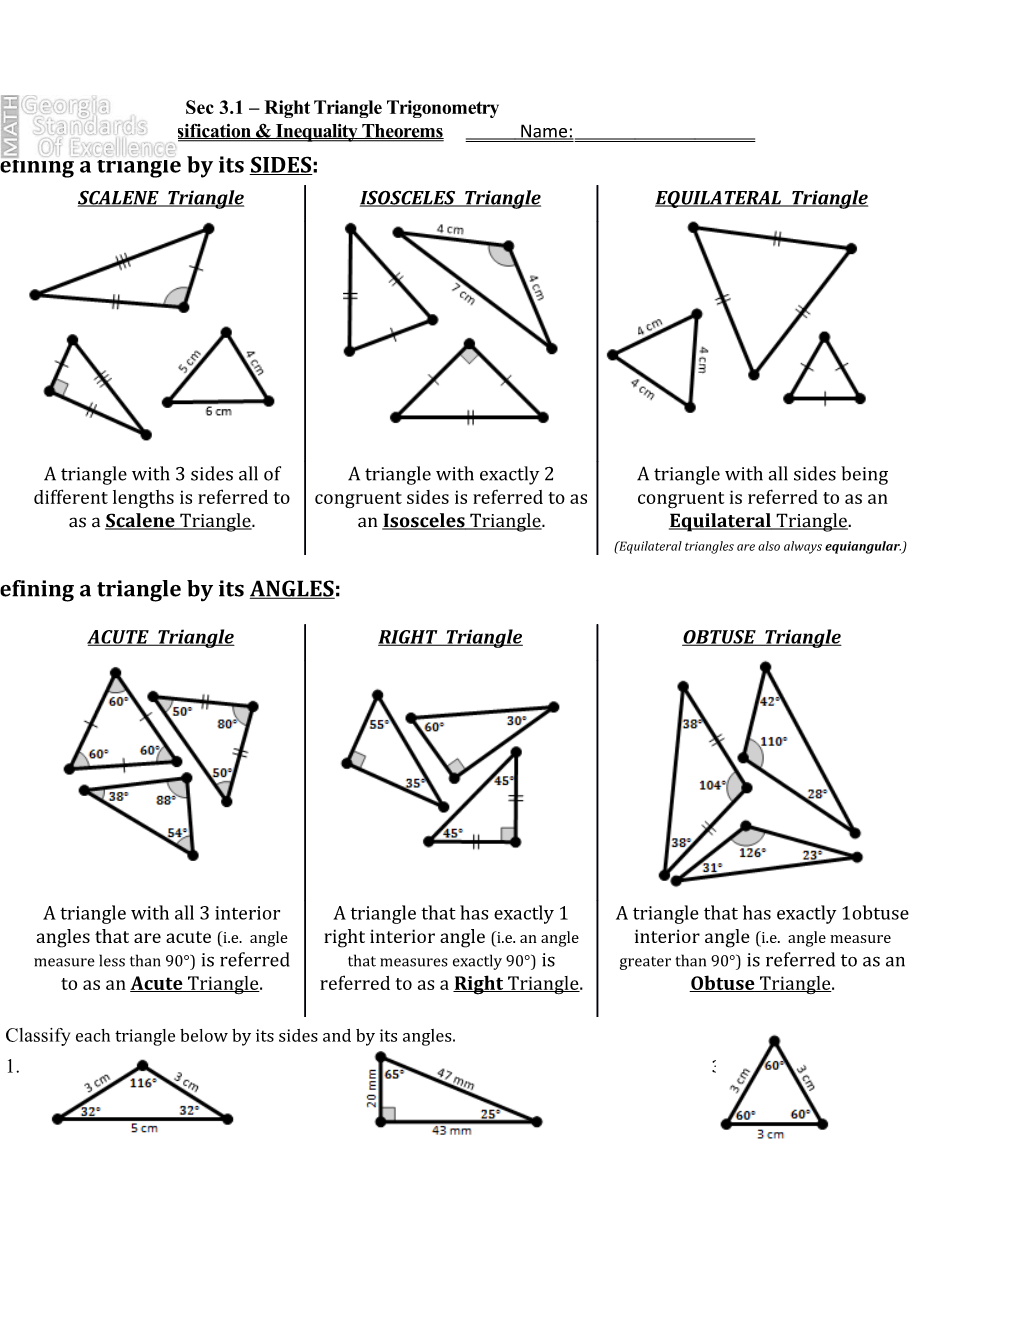 Triangle Classification & Inequality Theoremsname